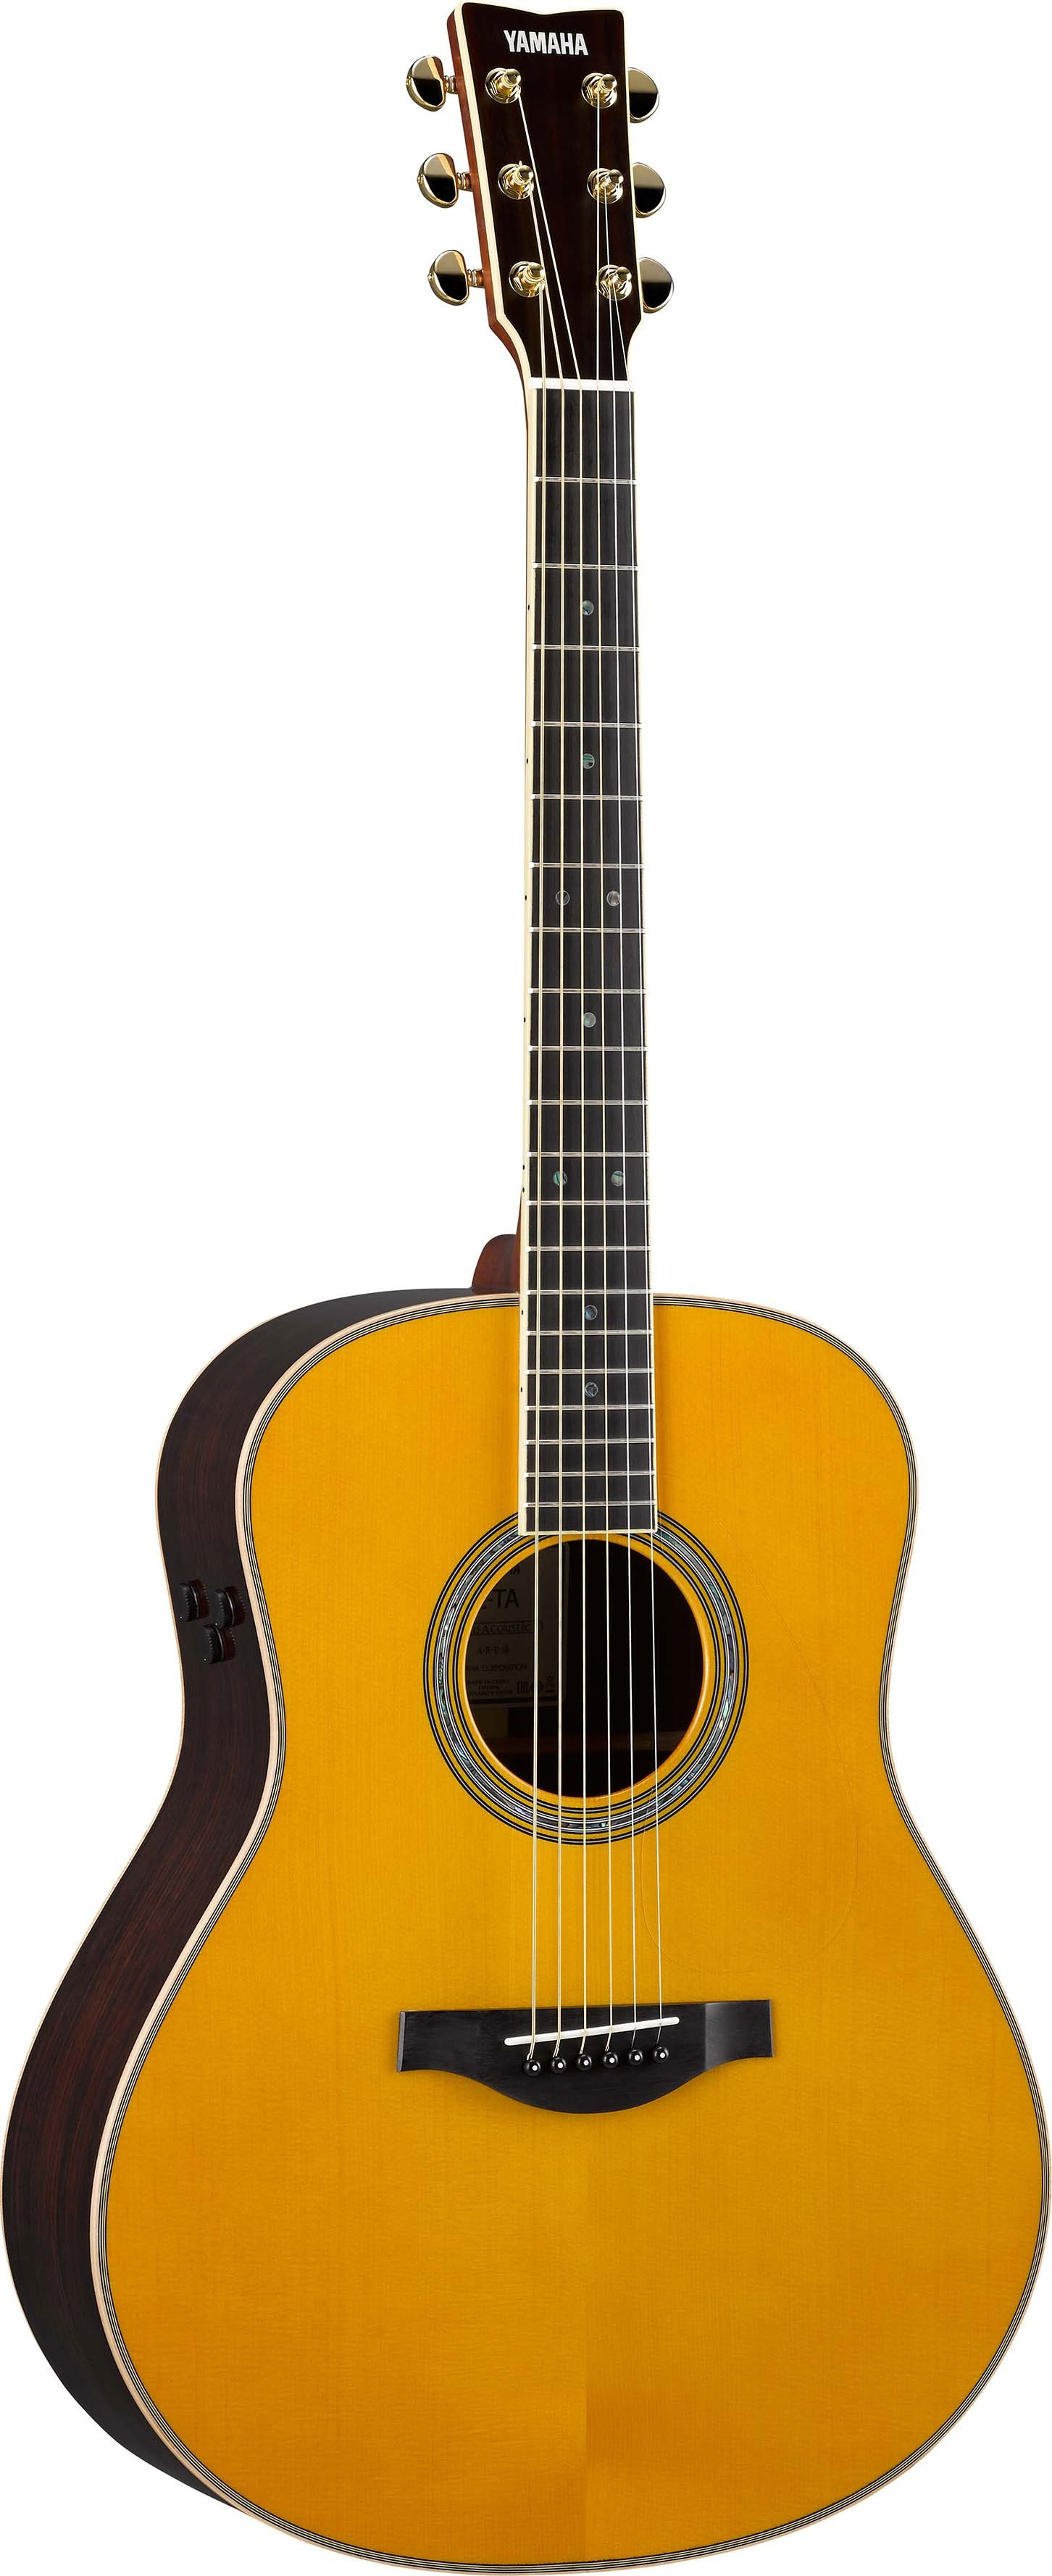 Step Up to a Better Acoustic Guitar